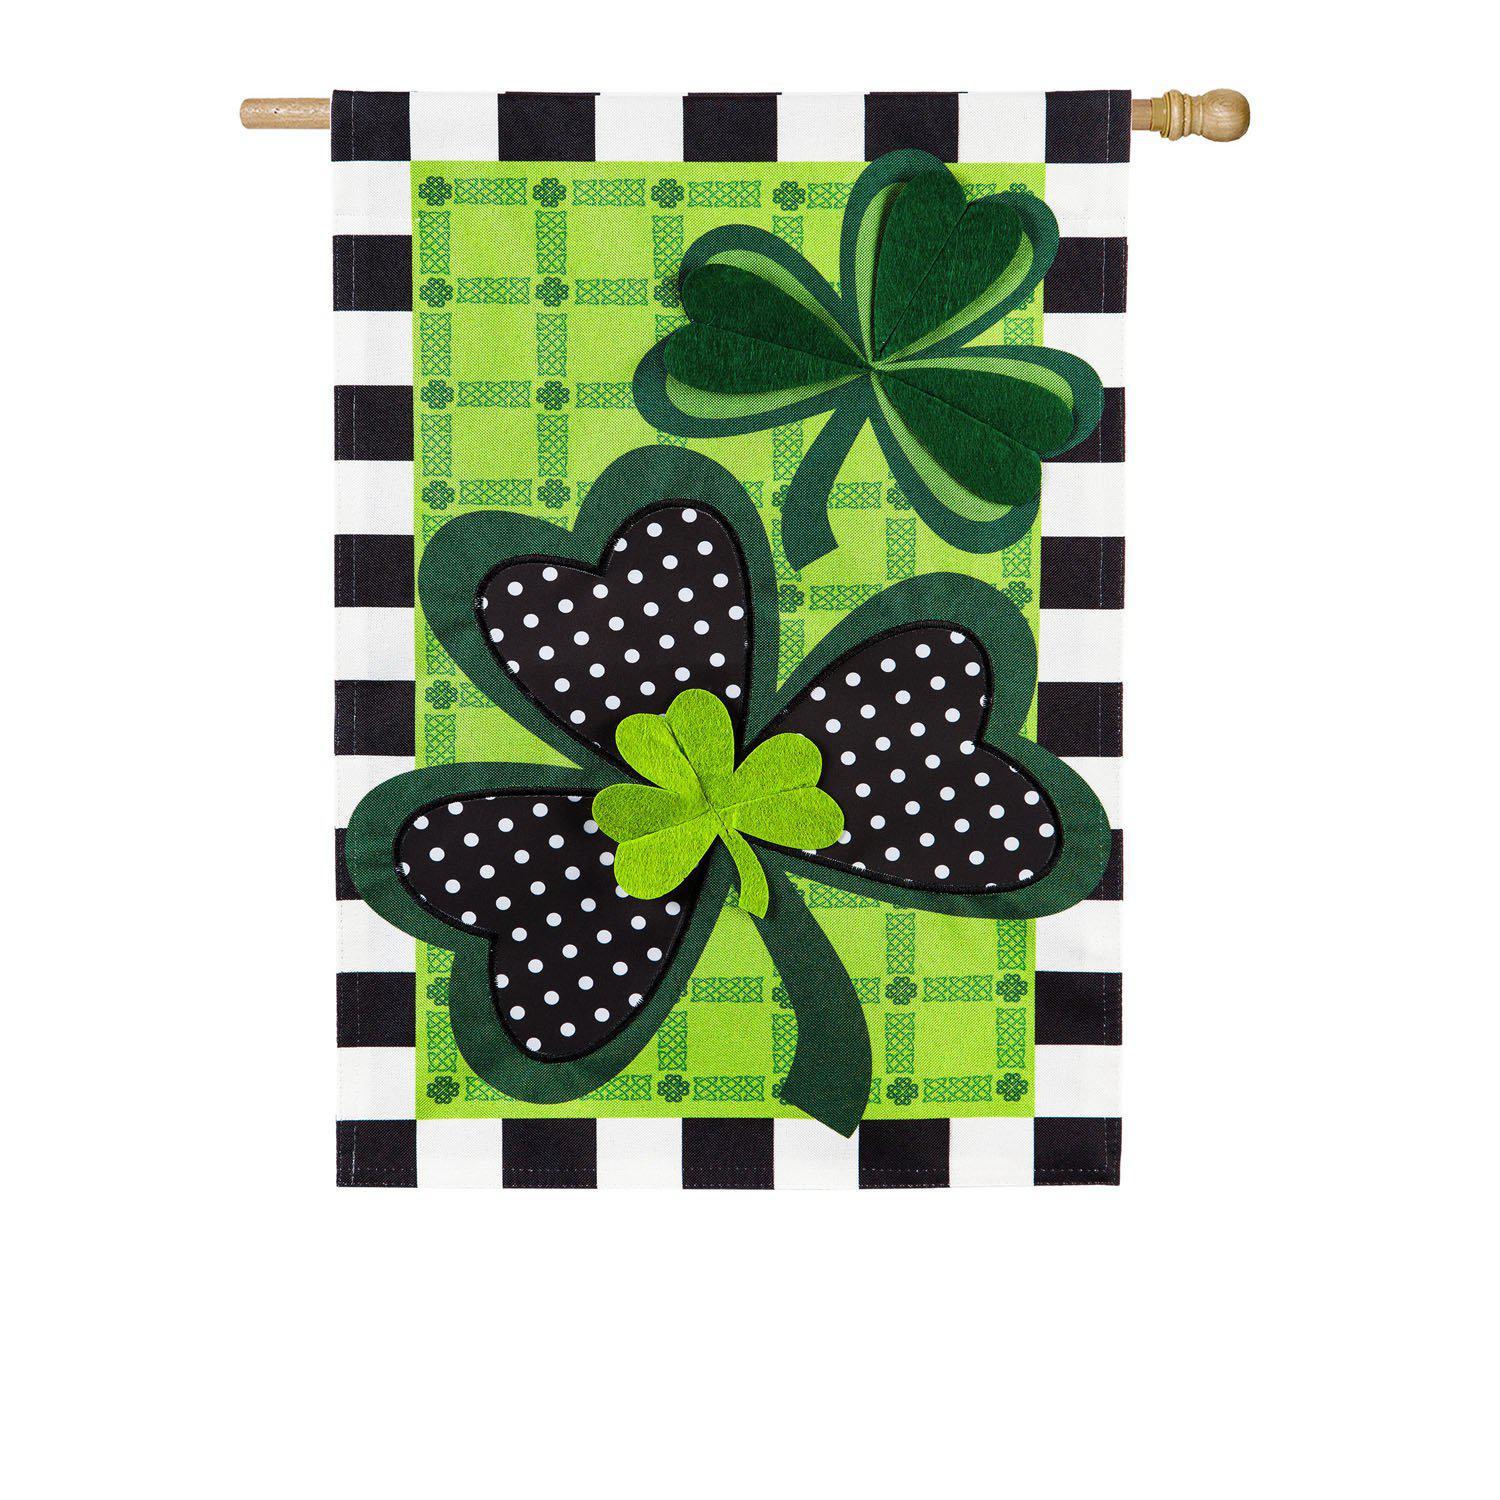 The Mixed Print Shamrocks house banner features shamrocks, plaids, polka dots and blocks in shades of green, black and white. 